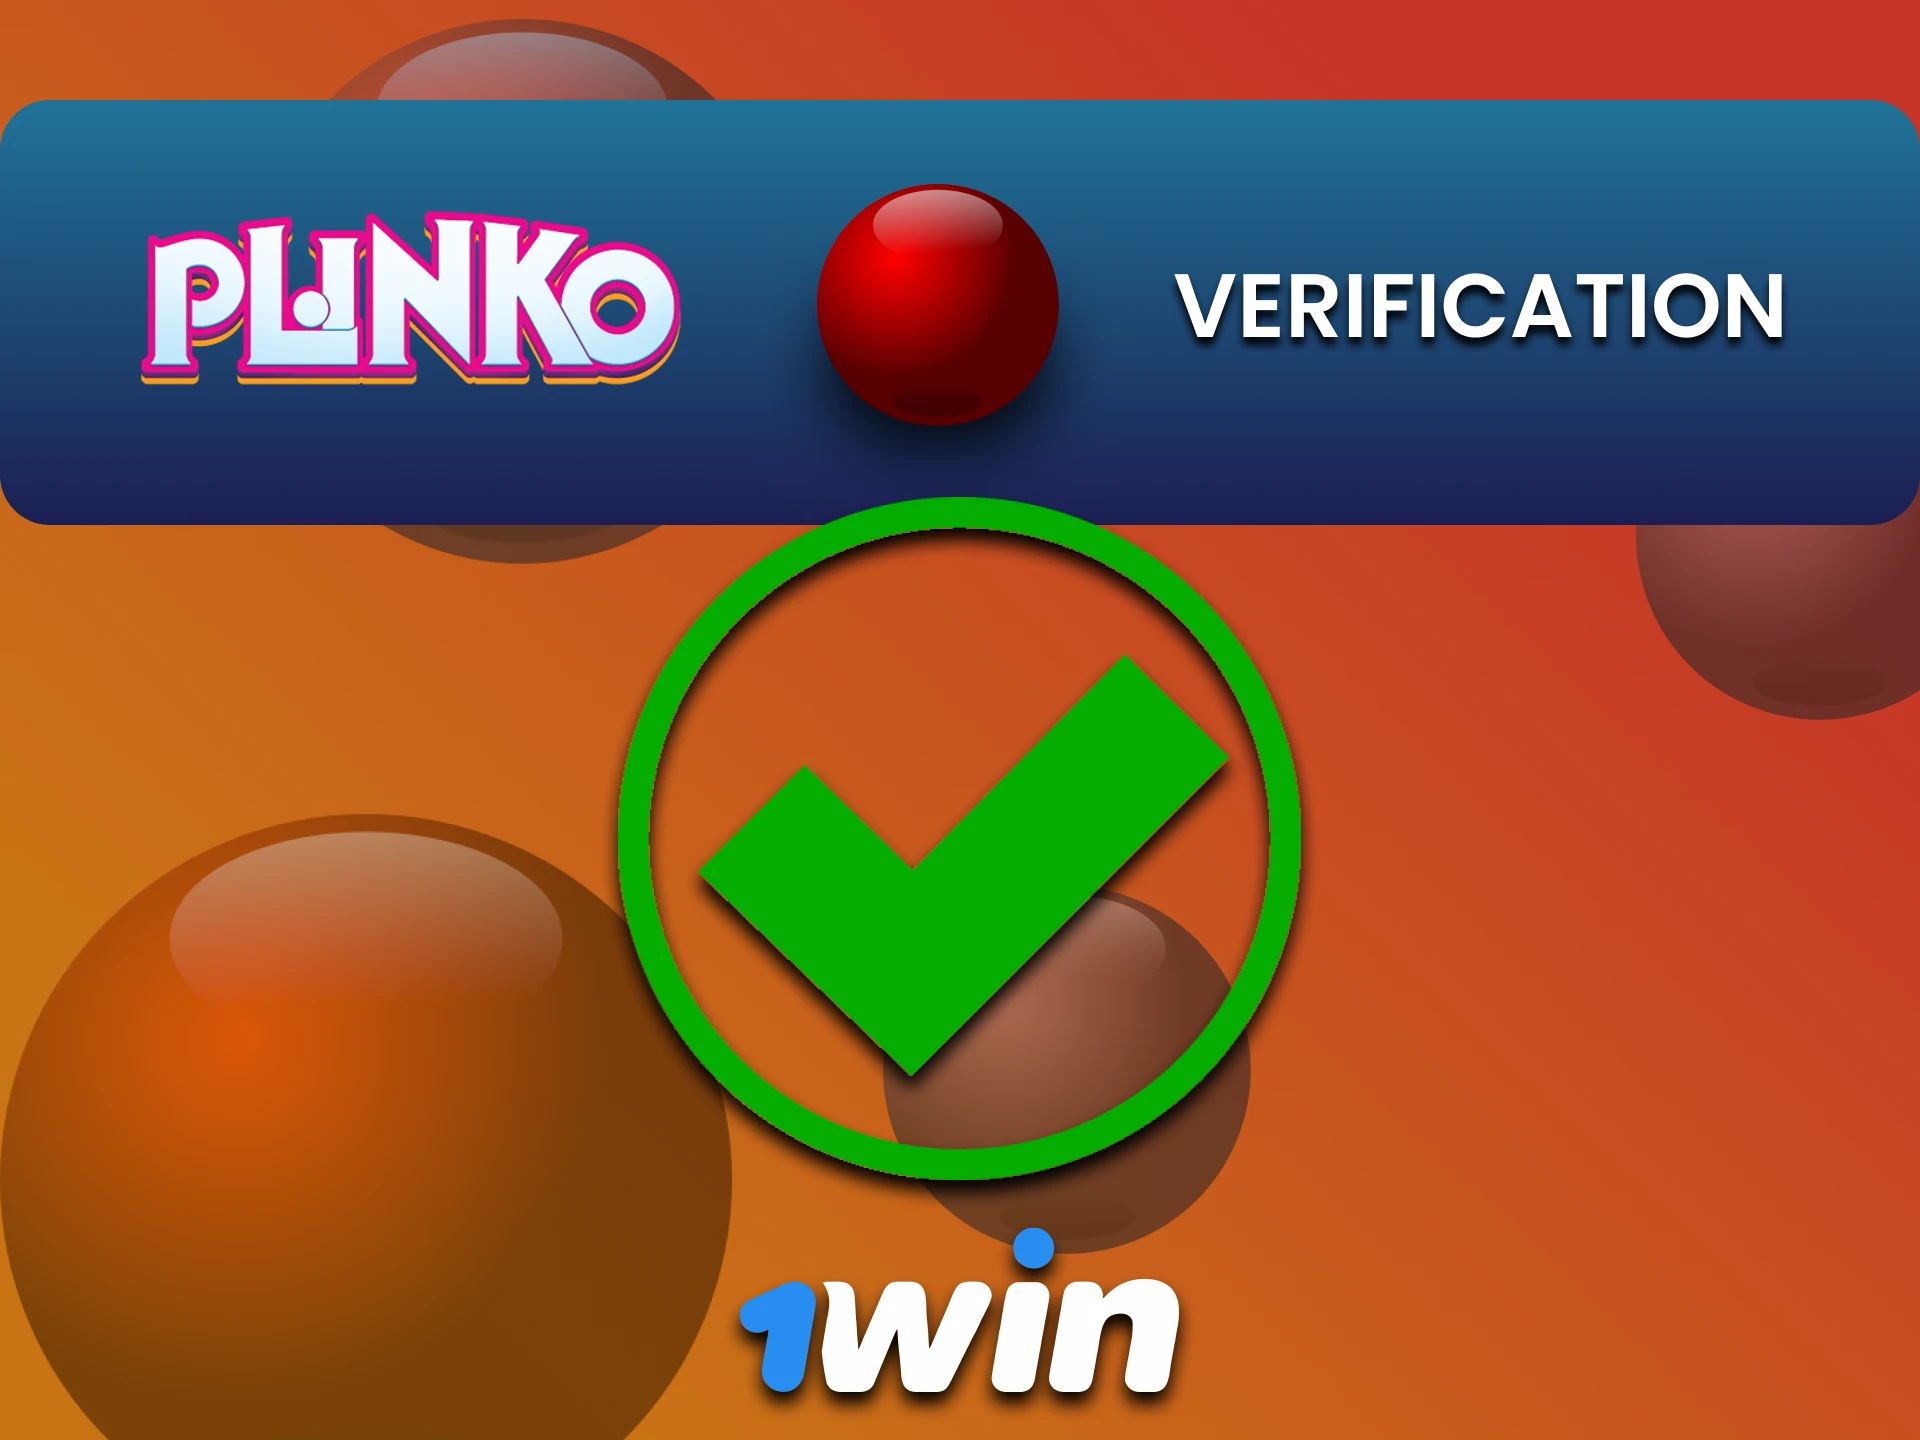 Fill in all the necessary information to play Plinko on 1win.